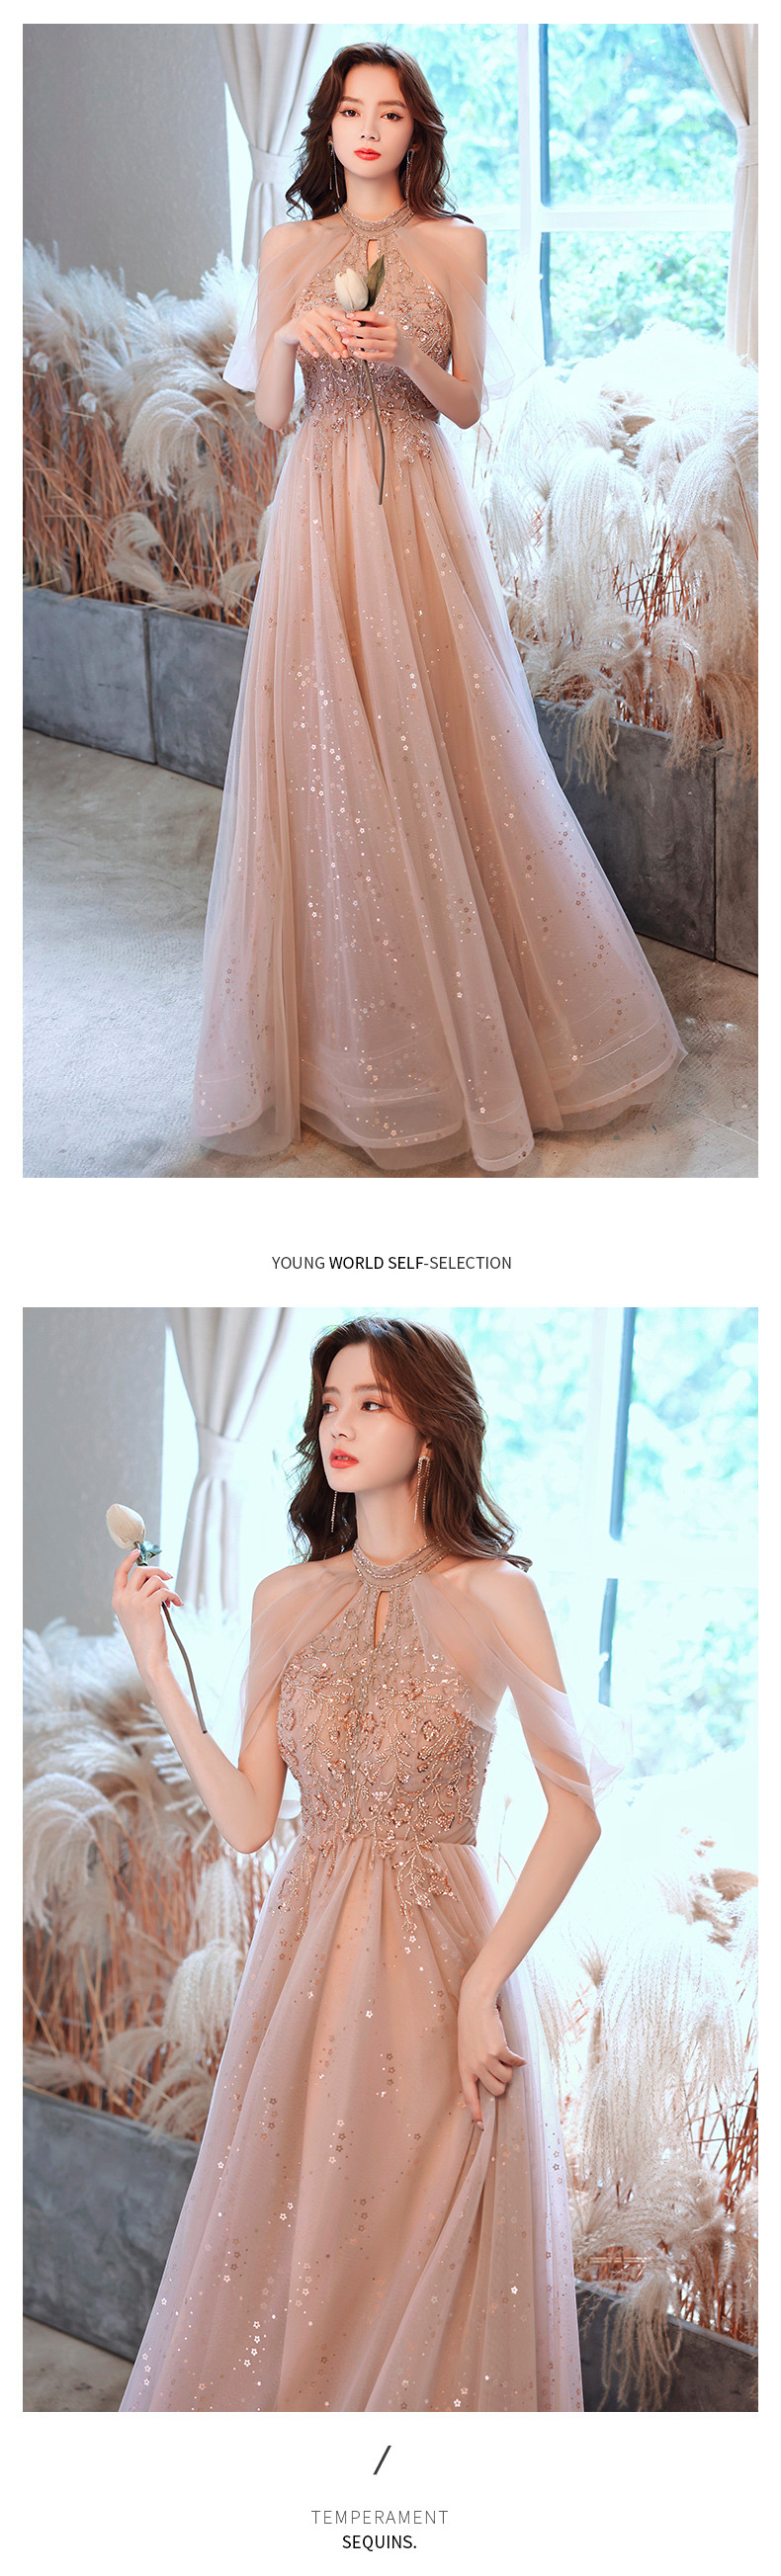 Long Dress for Wedding, Bridesmaid, Homecoming and Party12